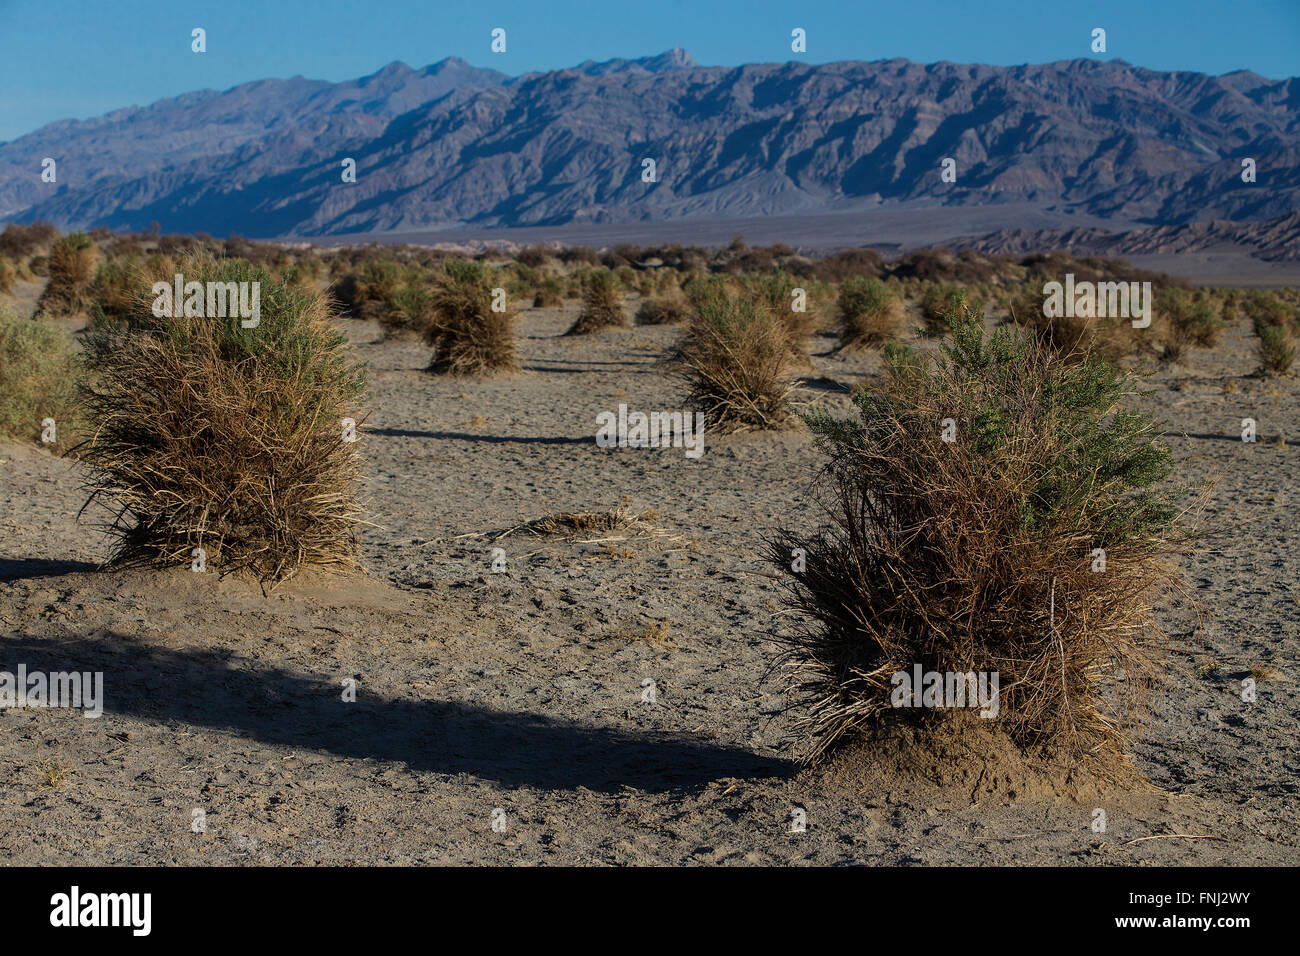 Devil's Cornfield, Death Valley National Park, California, United States of America Banque D'Images